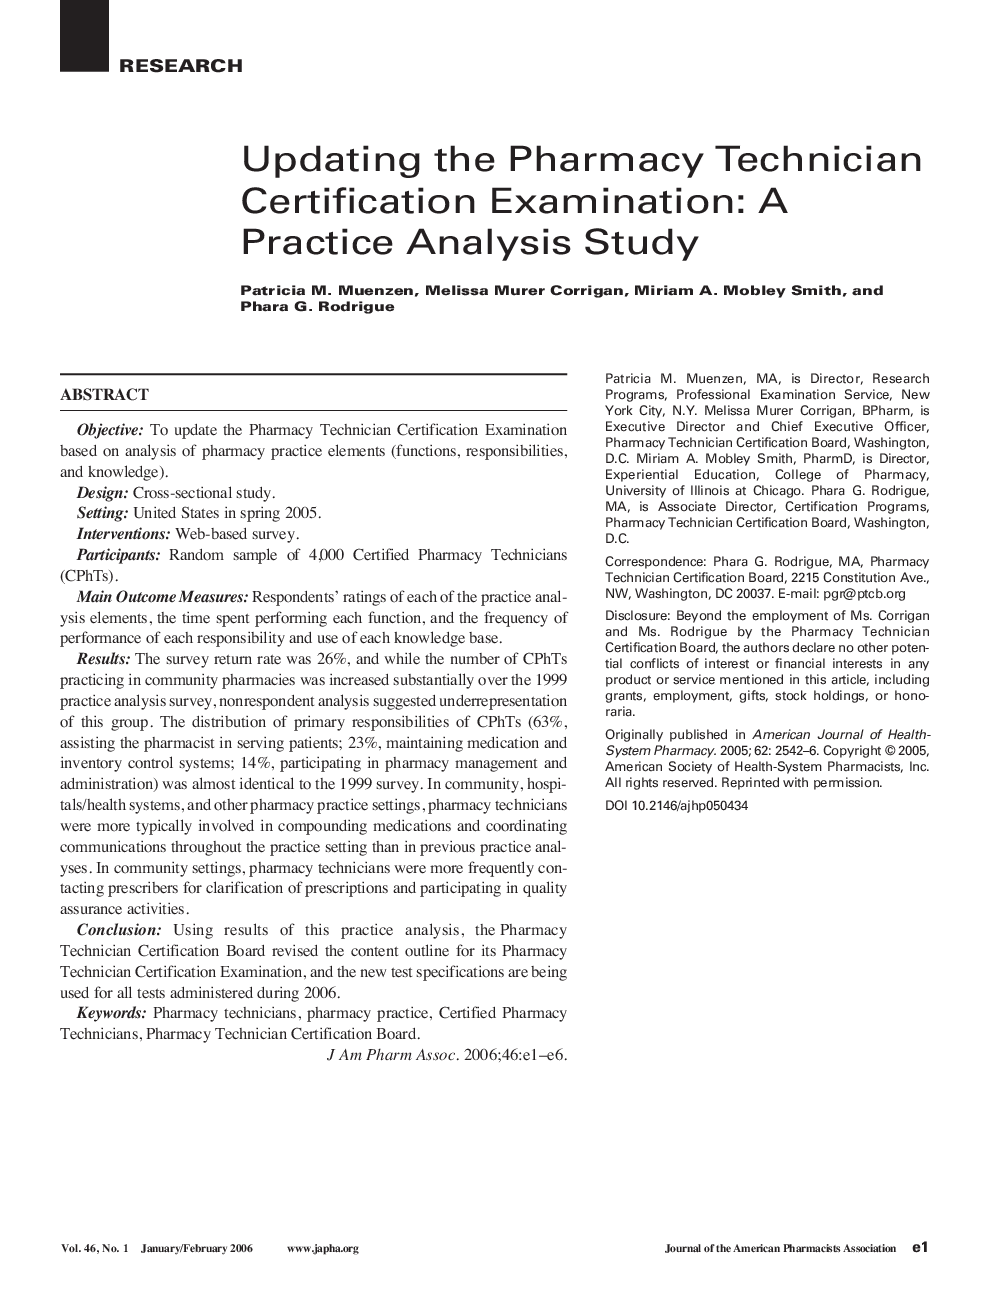 Updating the Pharmacy Technician Certification Examination: A Practice Analysis Study